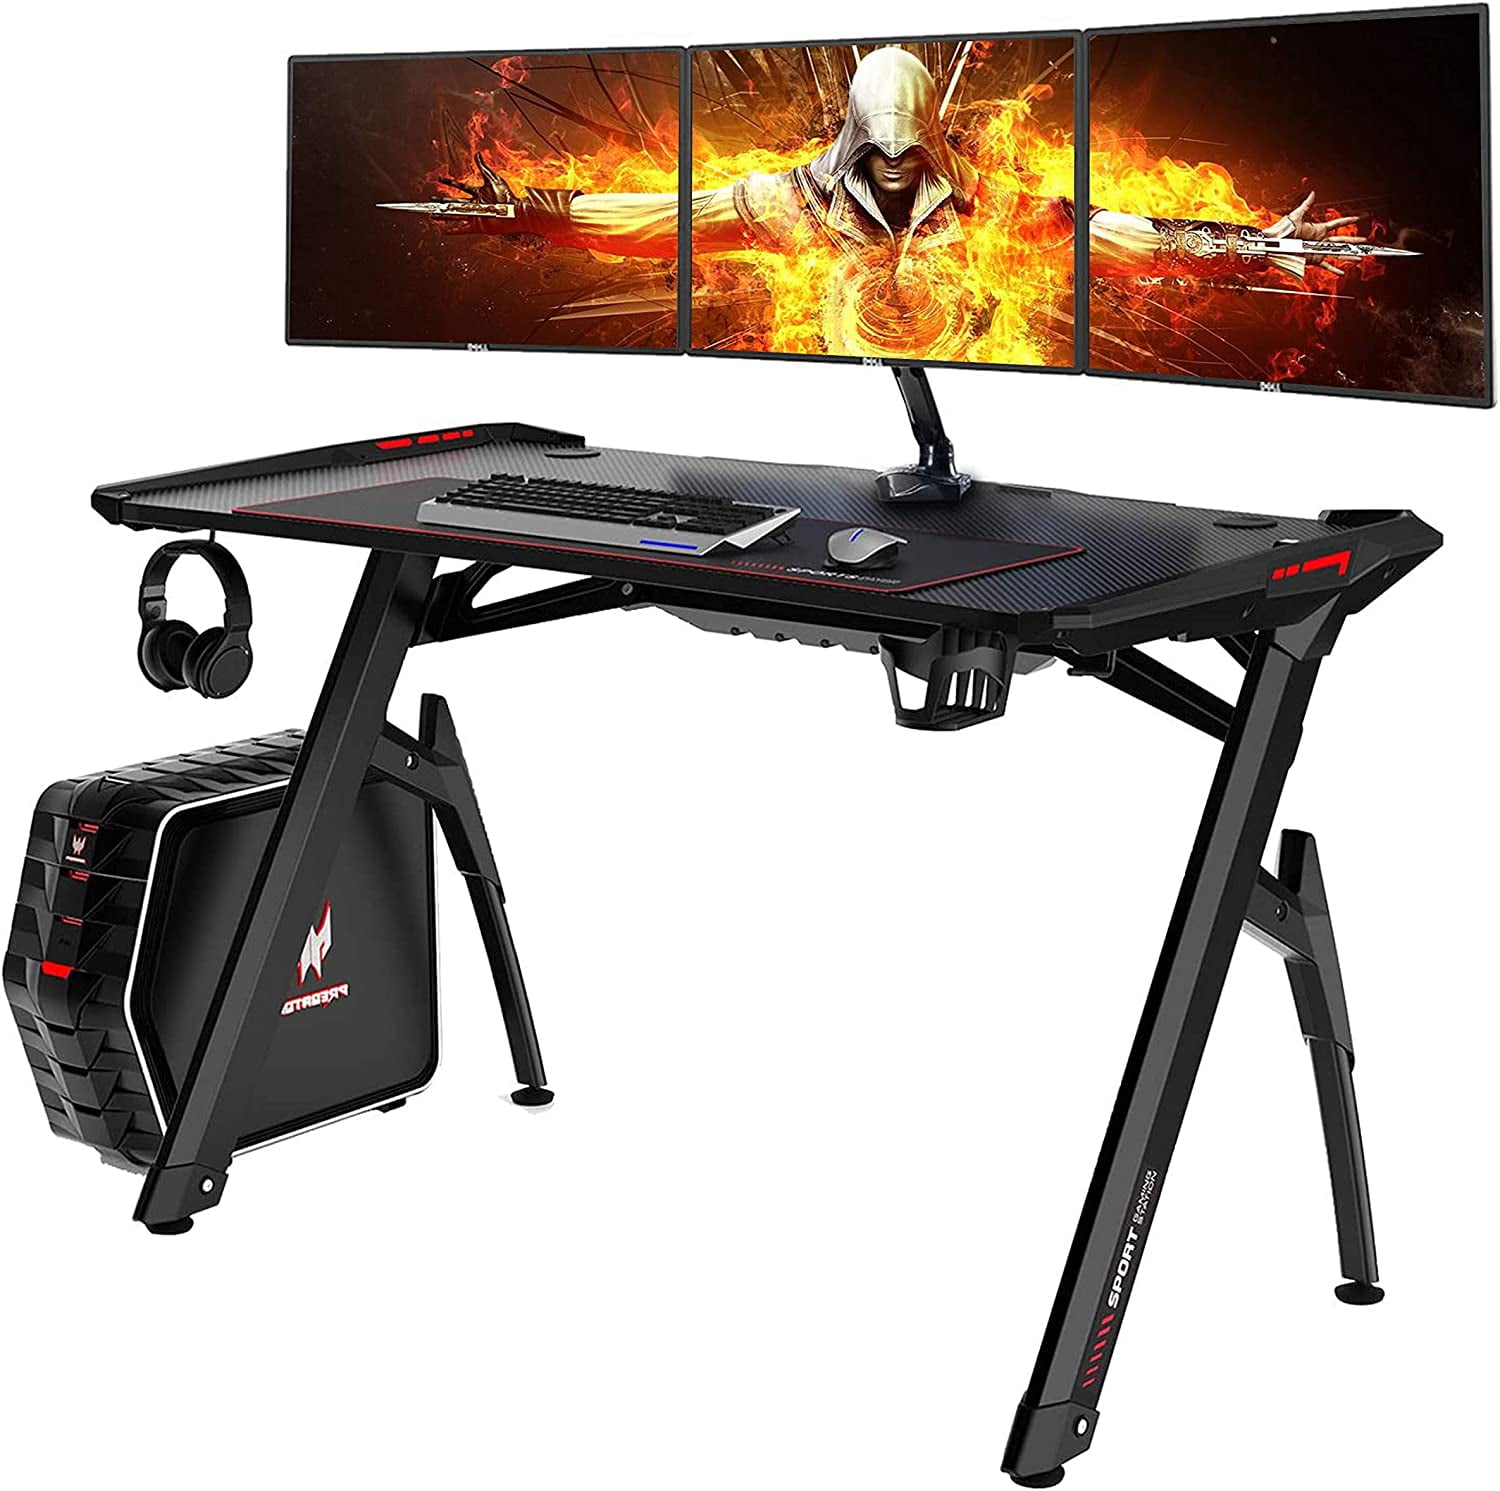 Details about   47" Gaming Desk Home Office Computer Table Ergonomic Racing Gamer W/RC LED Light 